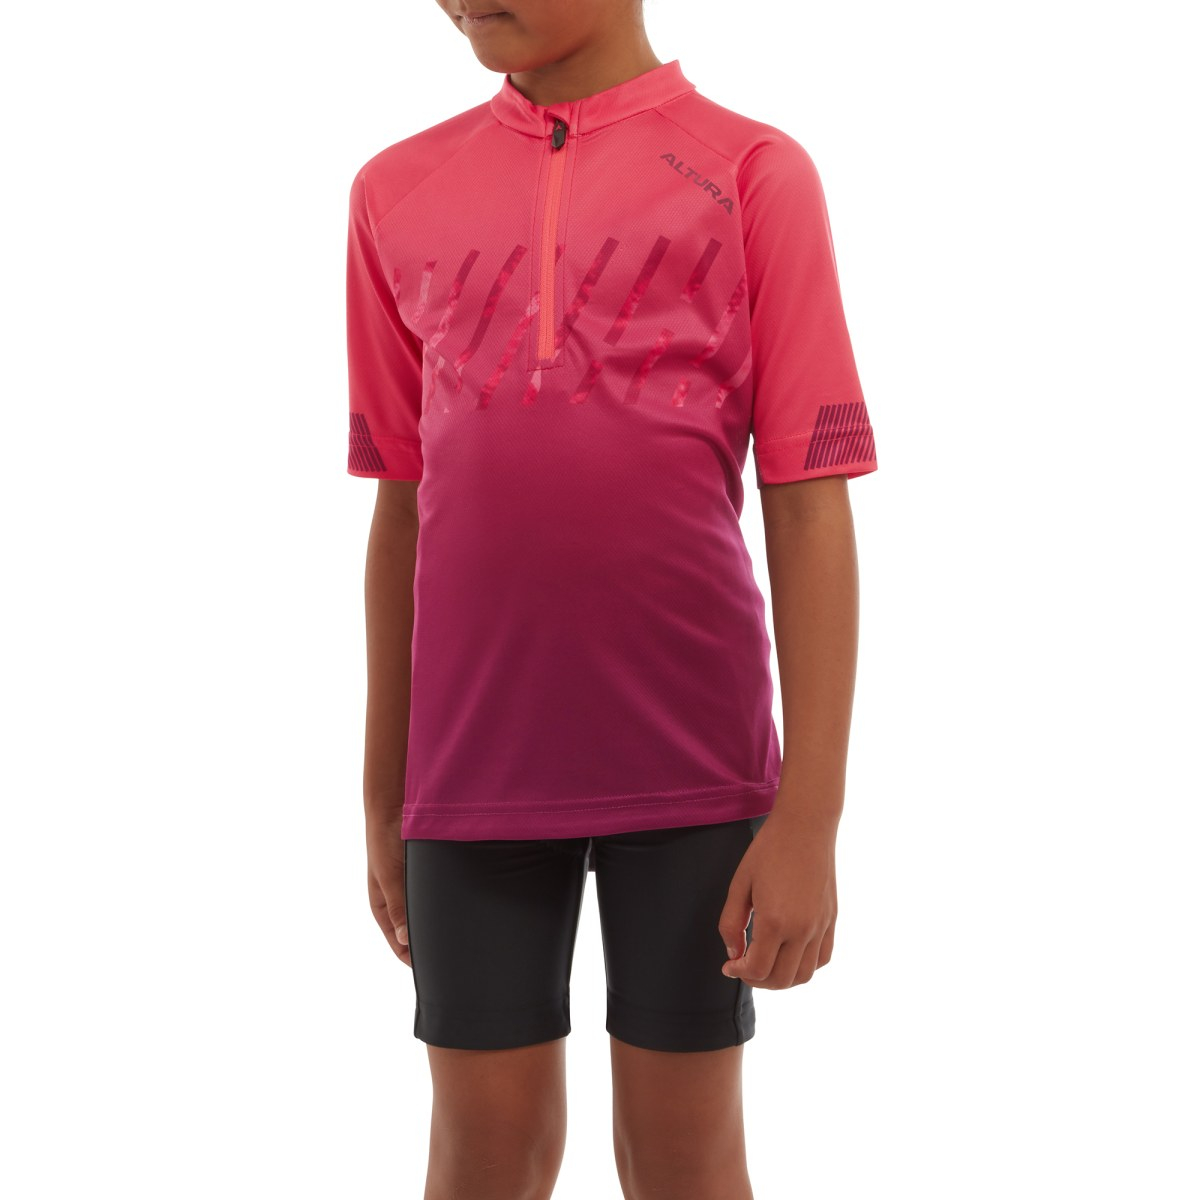 Altura  Kids Airstream Short Sleeve Cycling Jersey 9 to 10 Years PINK